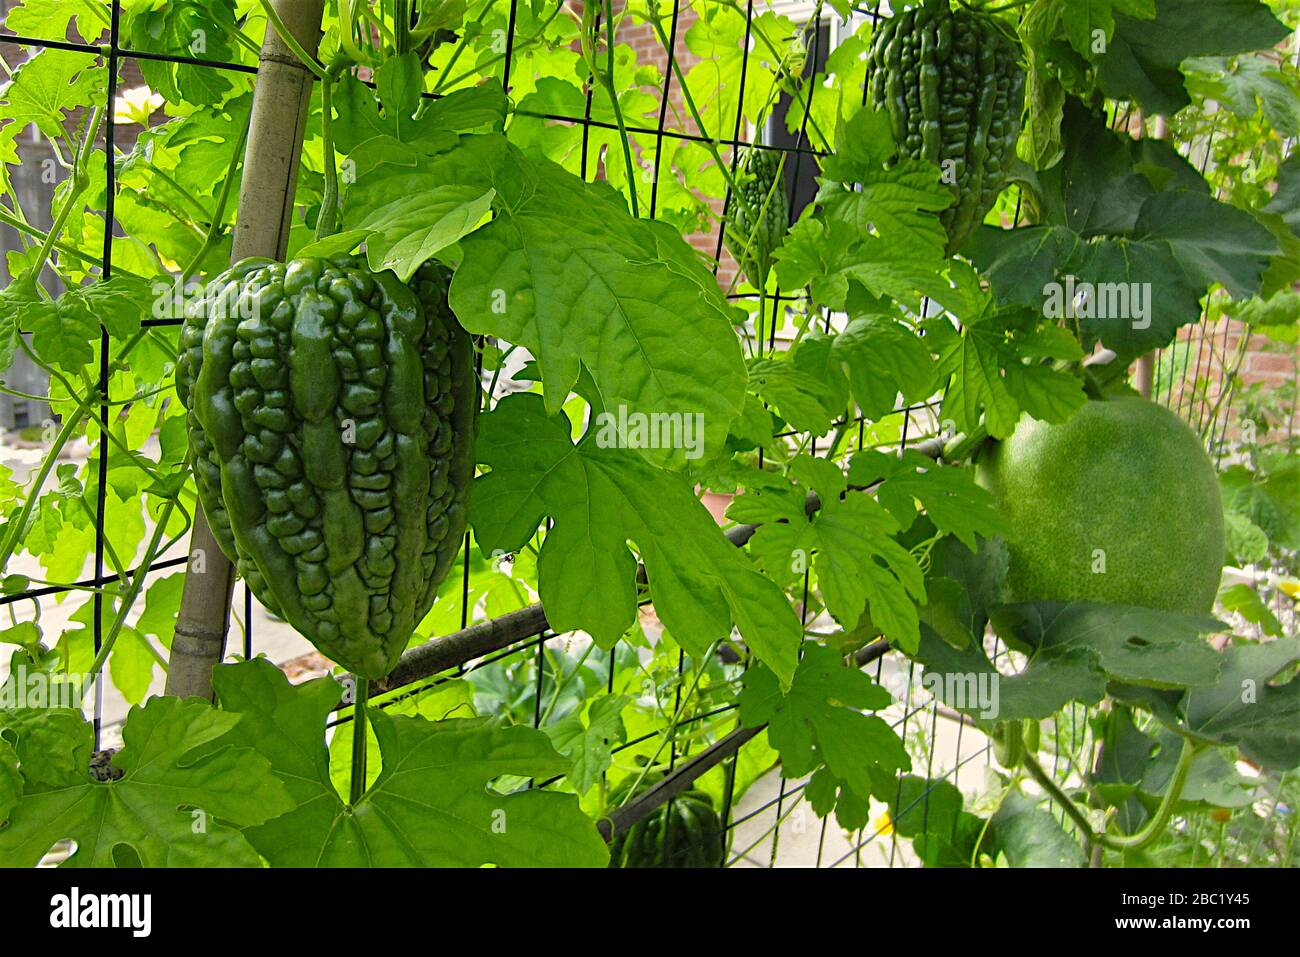 Organic bitter melon and winter melon plants climbing up the chicken wire mesh, part of urban gardening project, seen on a sunny summer day Stock Photo